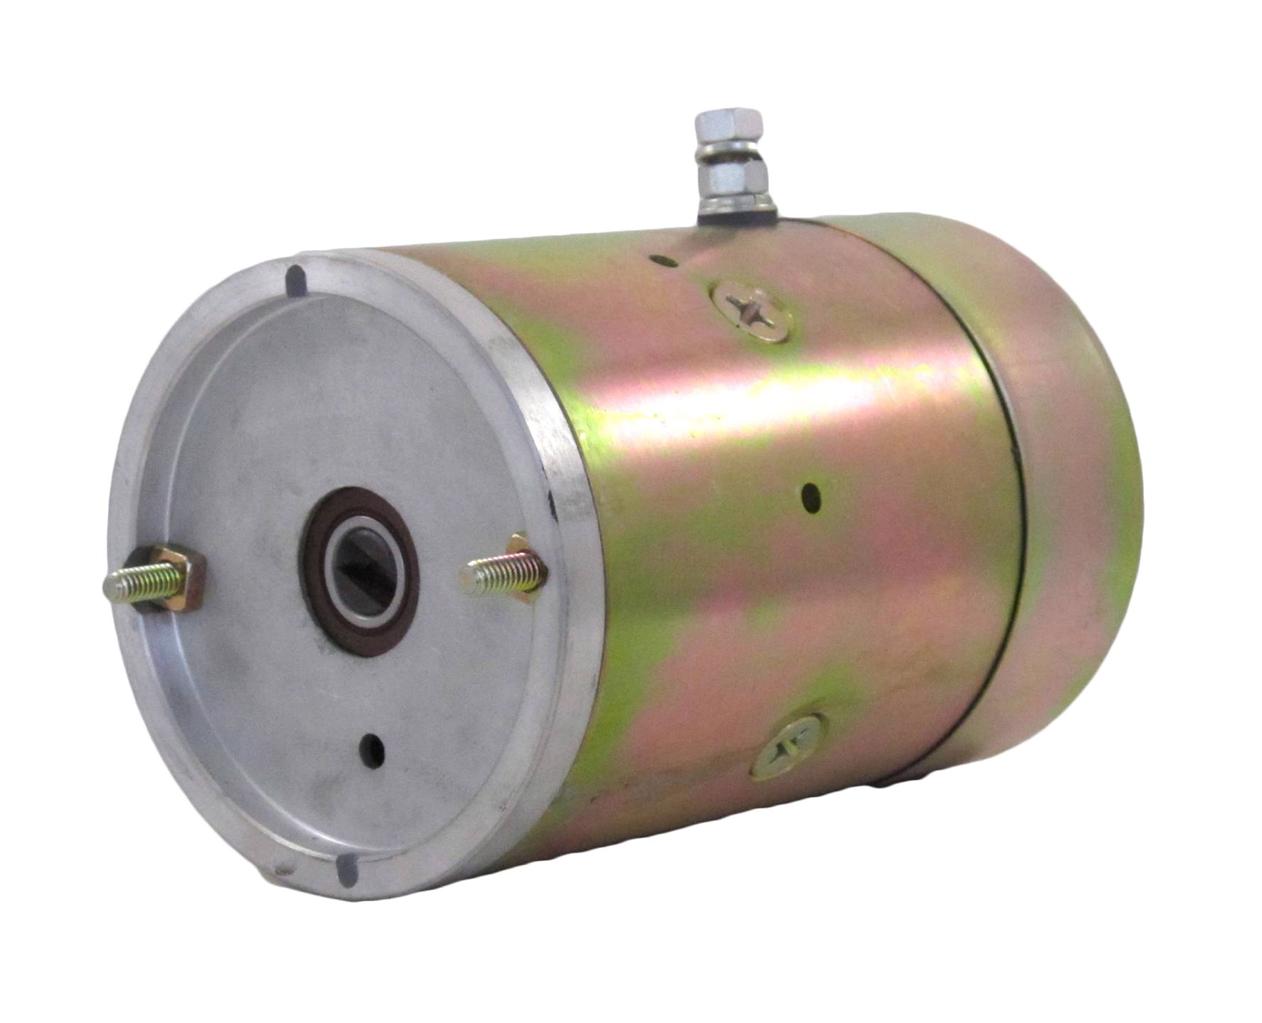 Rareelectrical New Snow Plow MOTOR COMPATIBLE WITH Meyer Diamond E57 E60 Pump 15687 15727 11-212-981 15689 15727 2529AB 2529AC 2869AB 46-4196